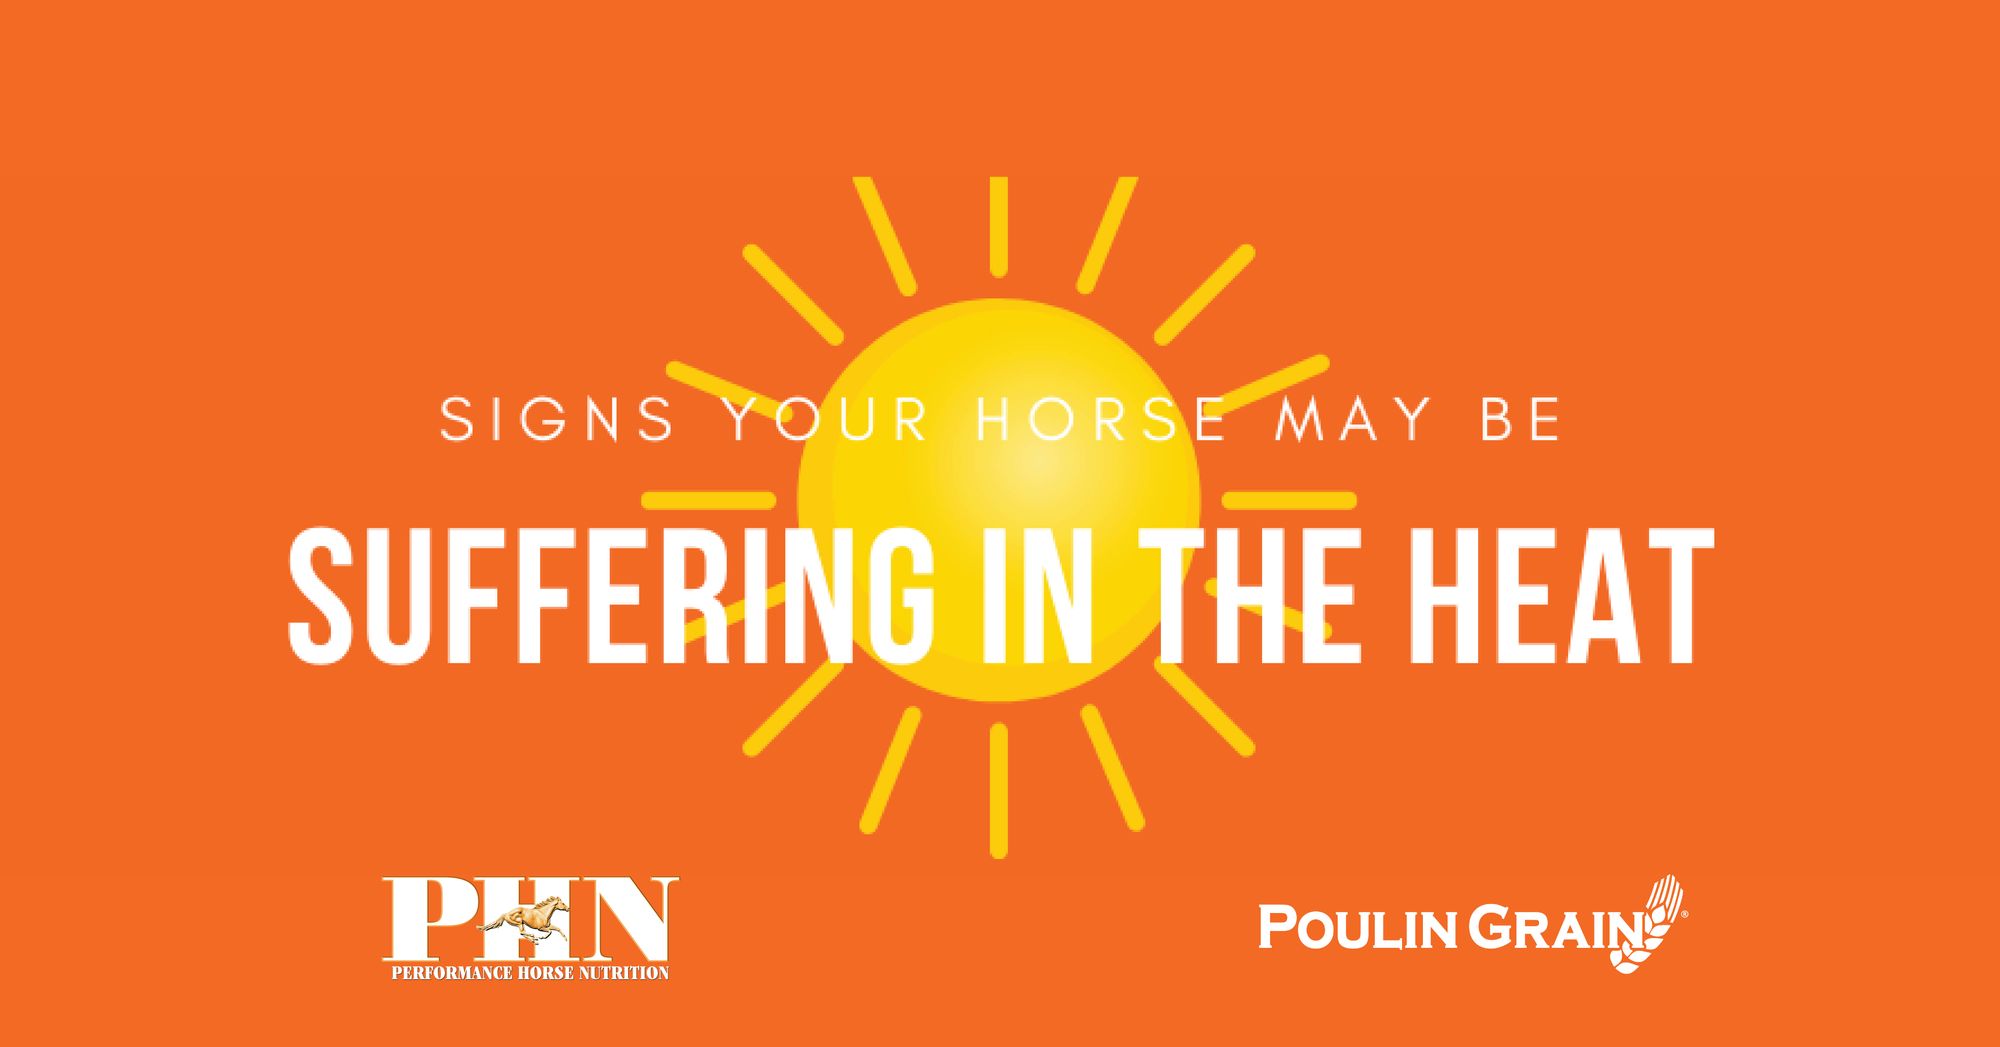 Signs Your Horse May Be Suffering in the Heat